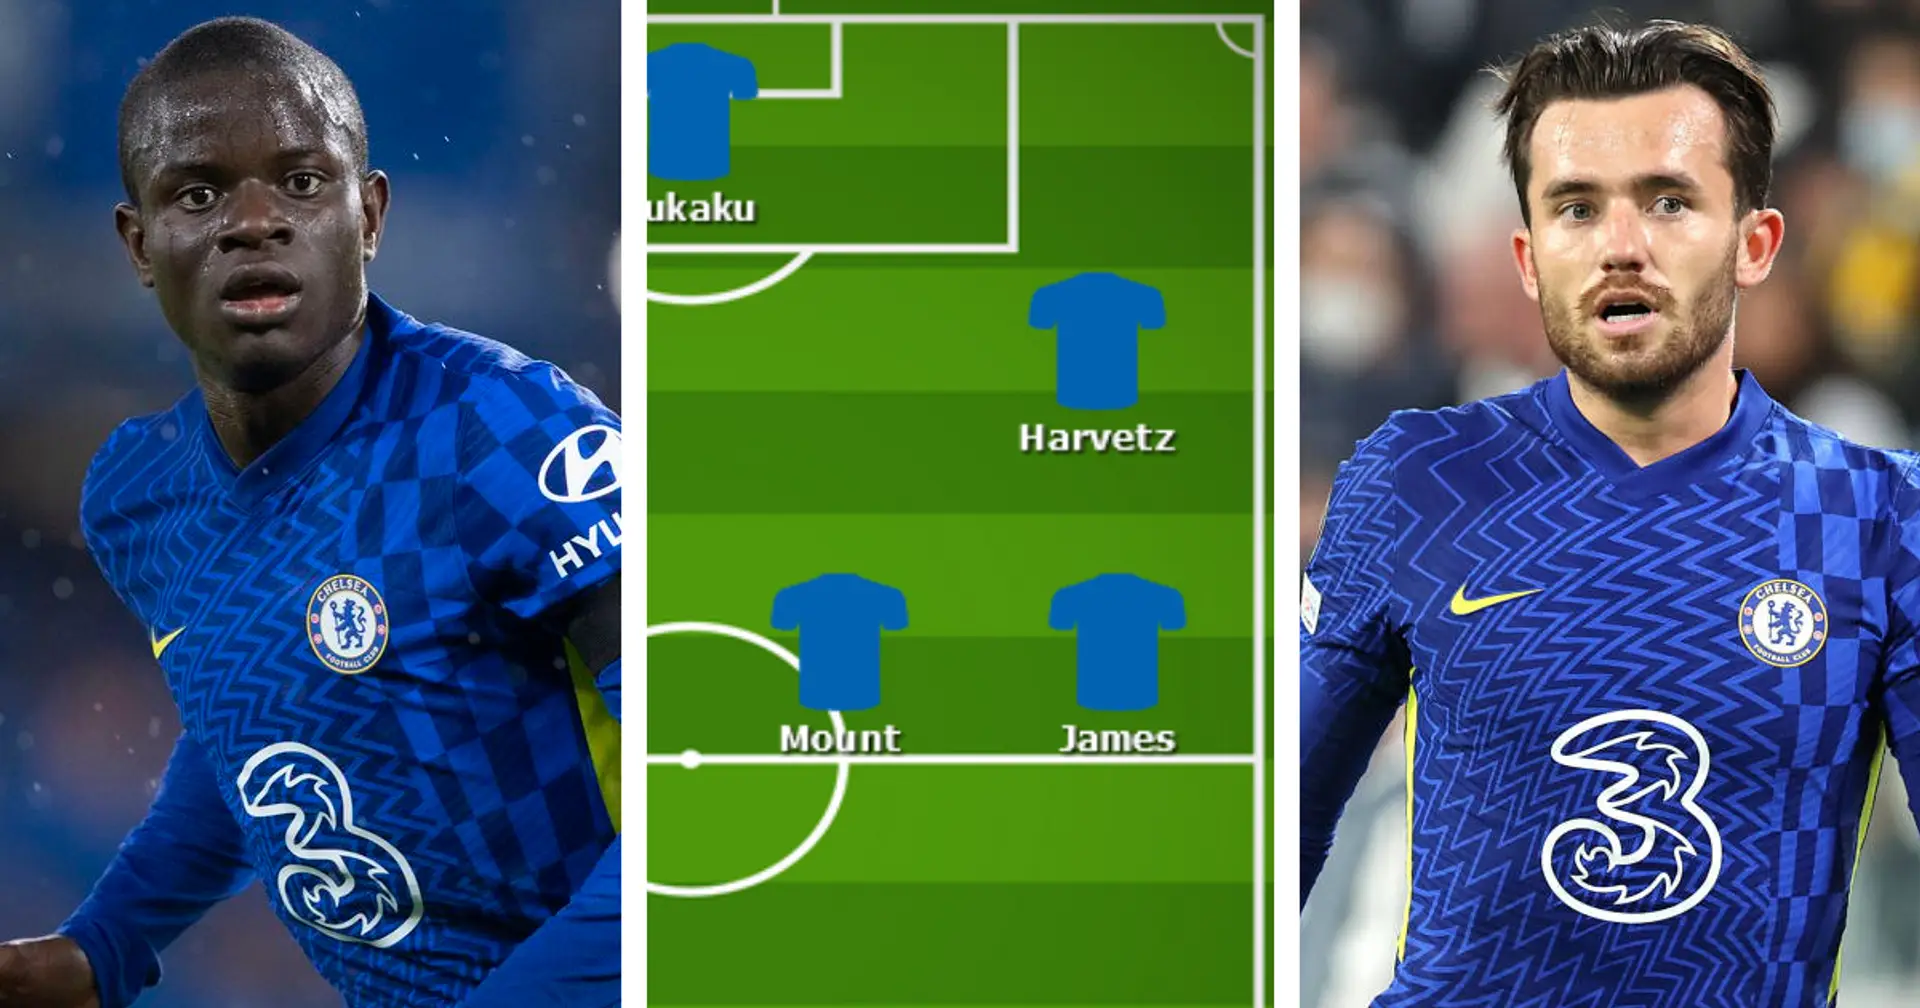 Team news for Chelsea vs Everton, probable lineups, stats